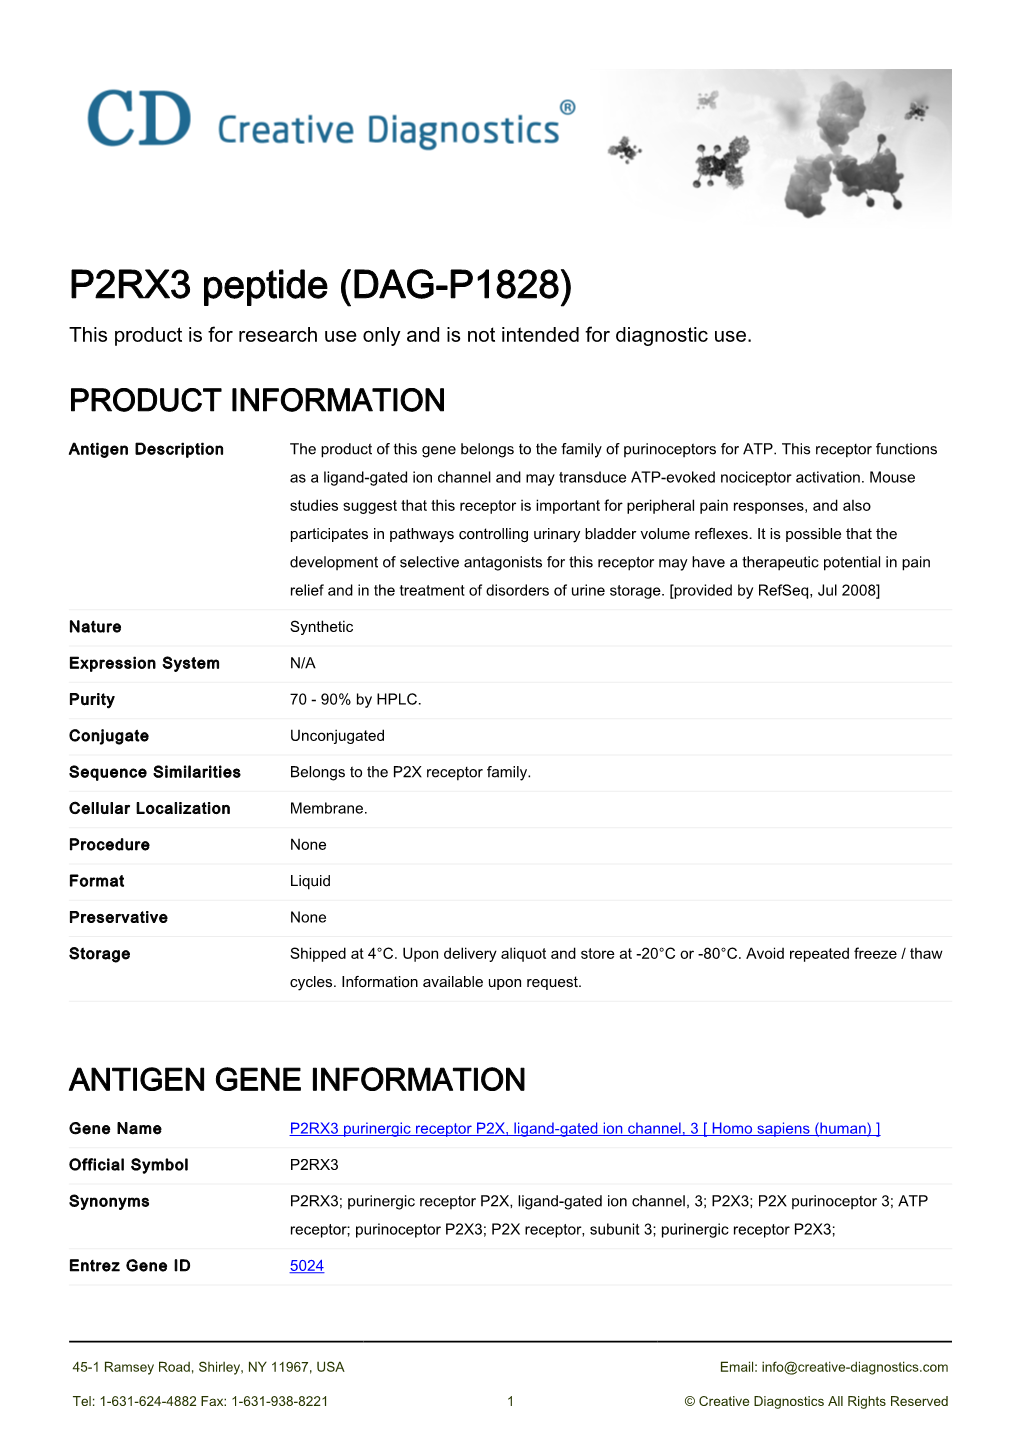 P2RX3 Peptide (DAG-P1828) This Product Is for Research Use Only and Is Not Intended for Diagnostic Use